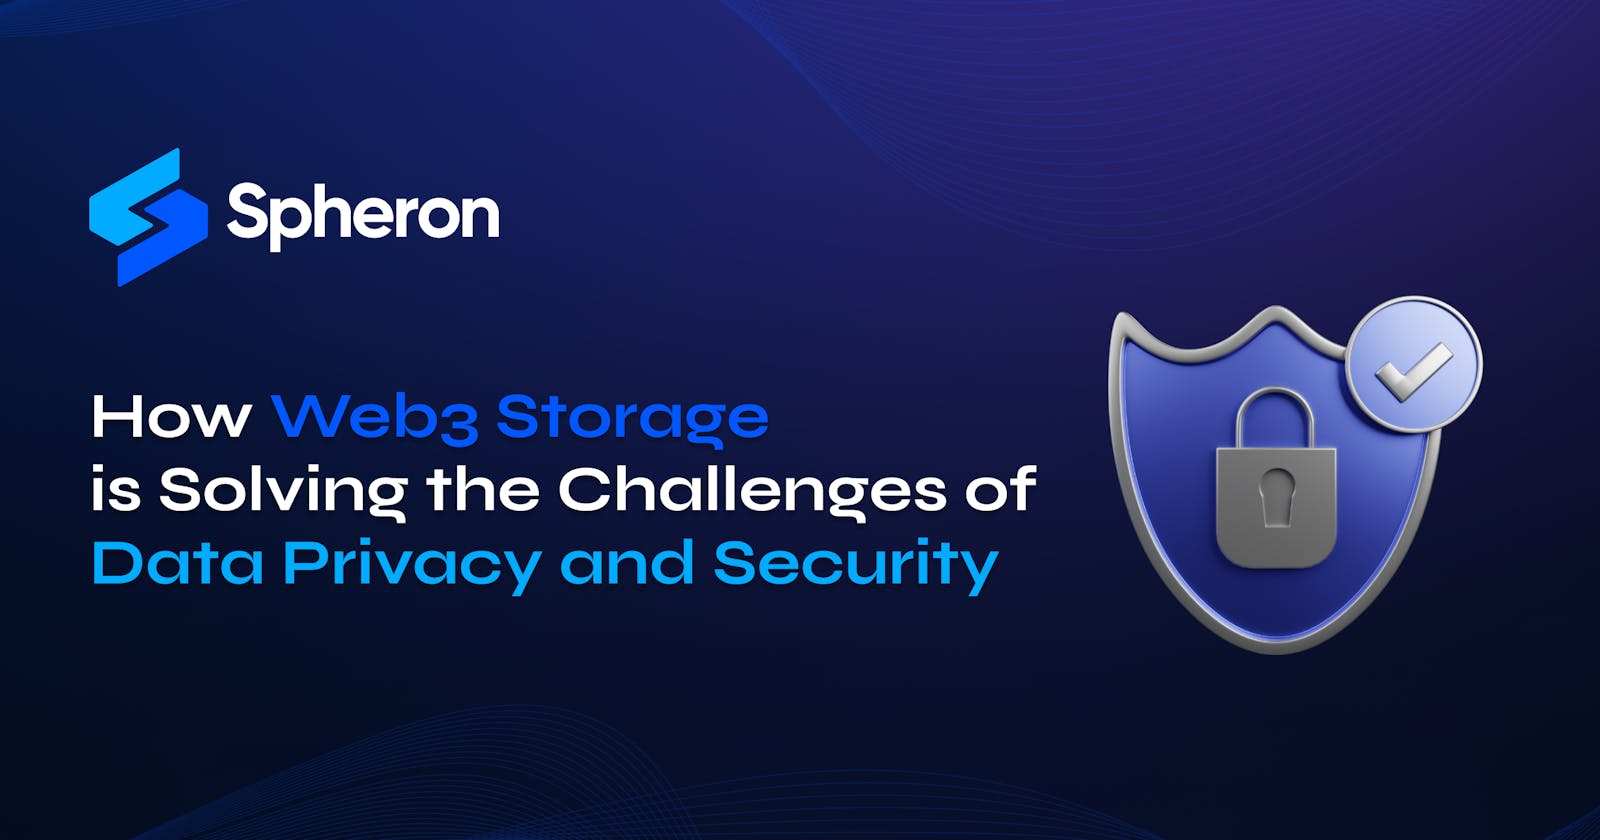 How Web3 Storage is Solving the Challenges of Data Privacy and Security